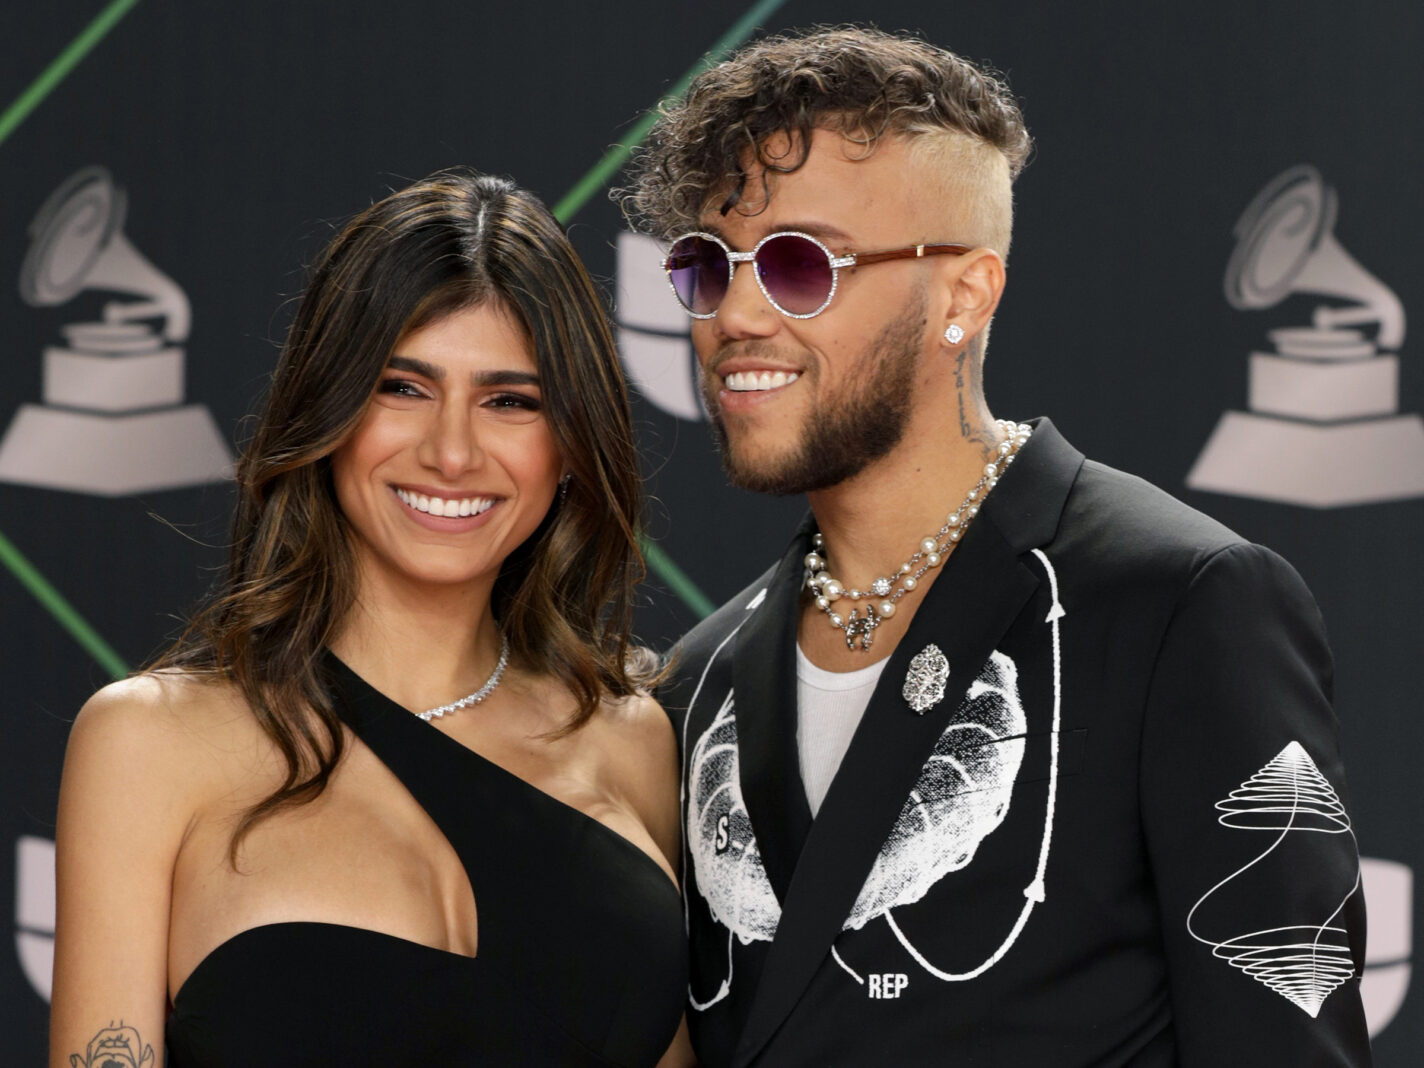 Are Mia Khalifa & Jhayco Back Together? Here's Why Fans Think So